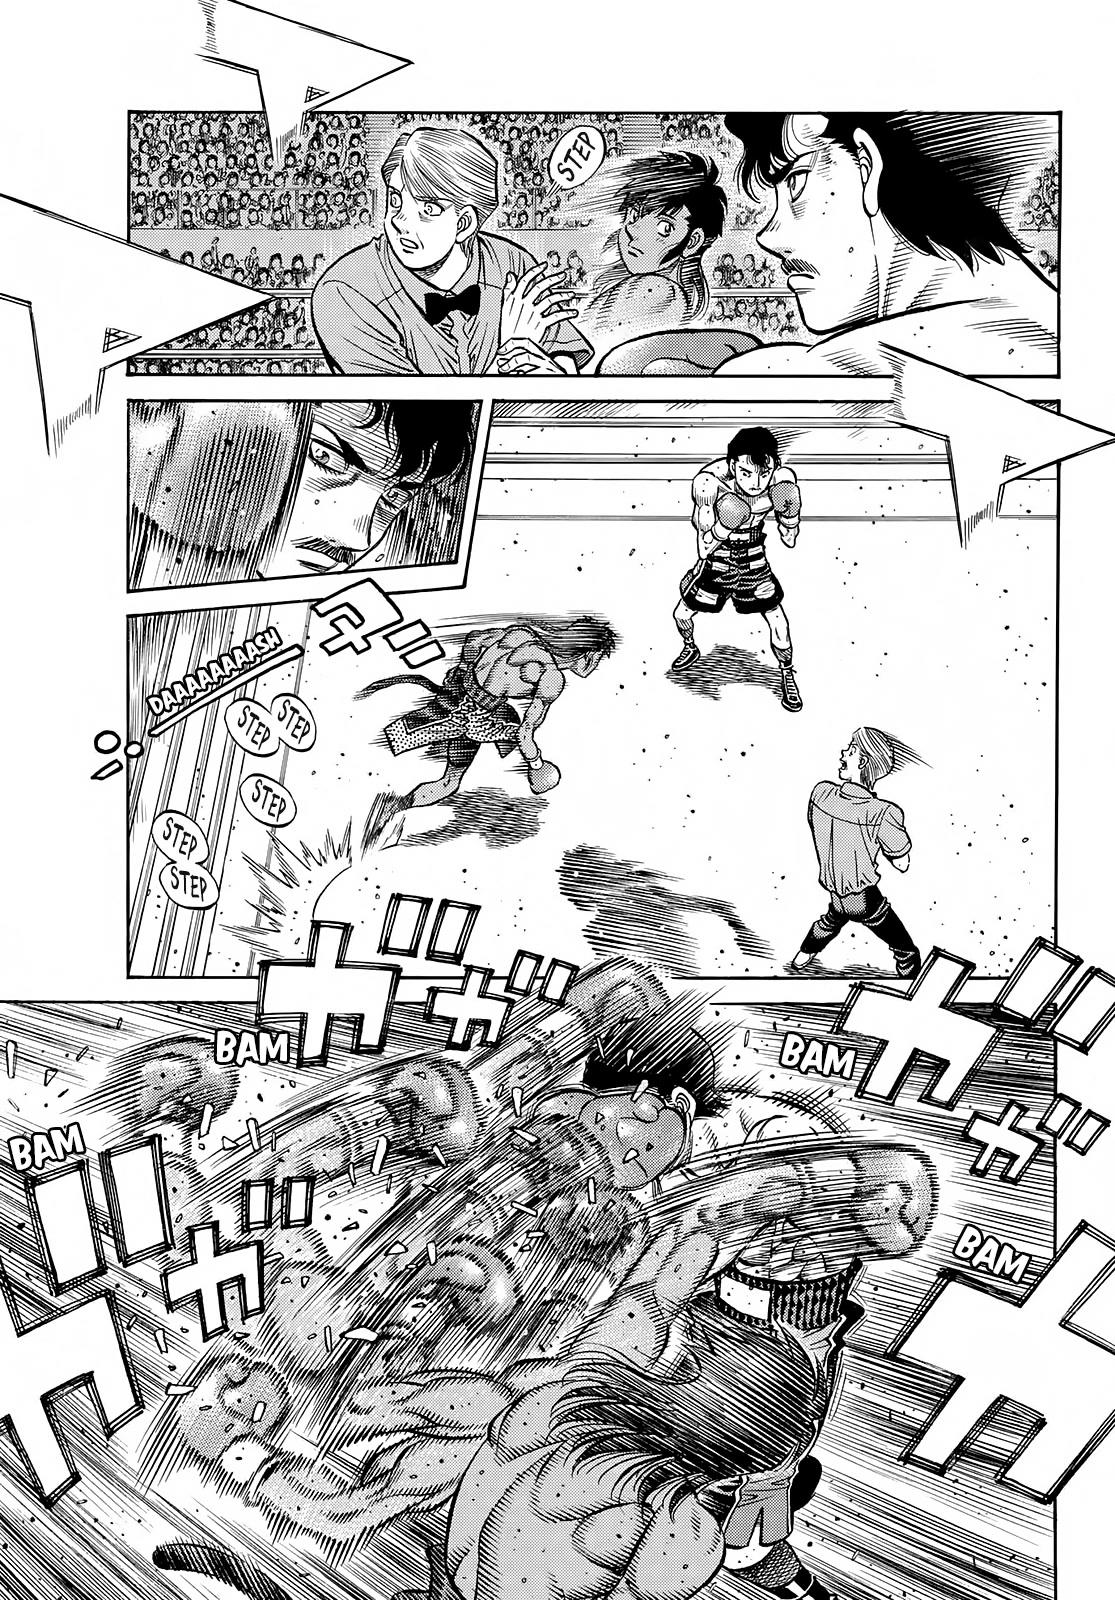 Hajime no Ippo, Chapter 1396 Unknown Boxing image 10